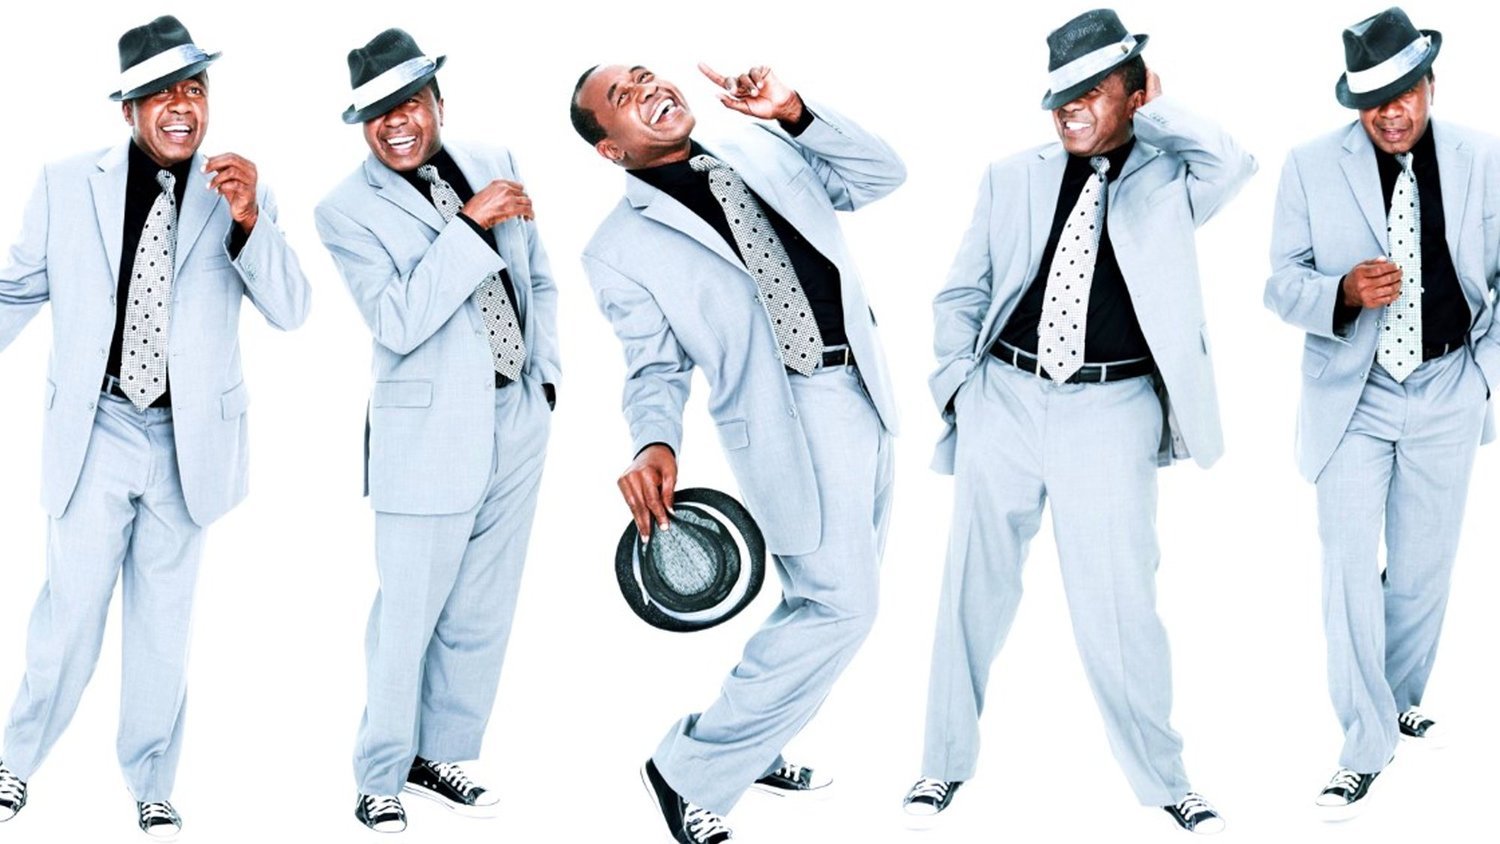 Interview: BEN VEREEN of STEPPIN' OUT WITH BEN VEREEN at the Musical Instrument Museum 